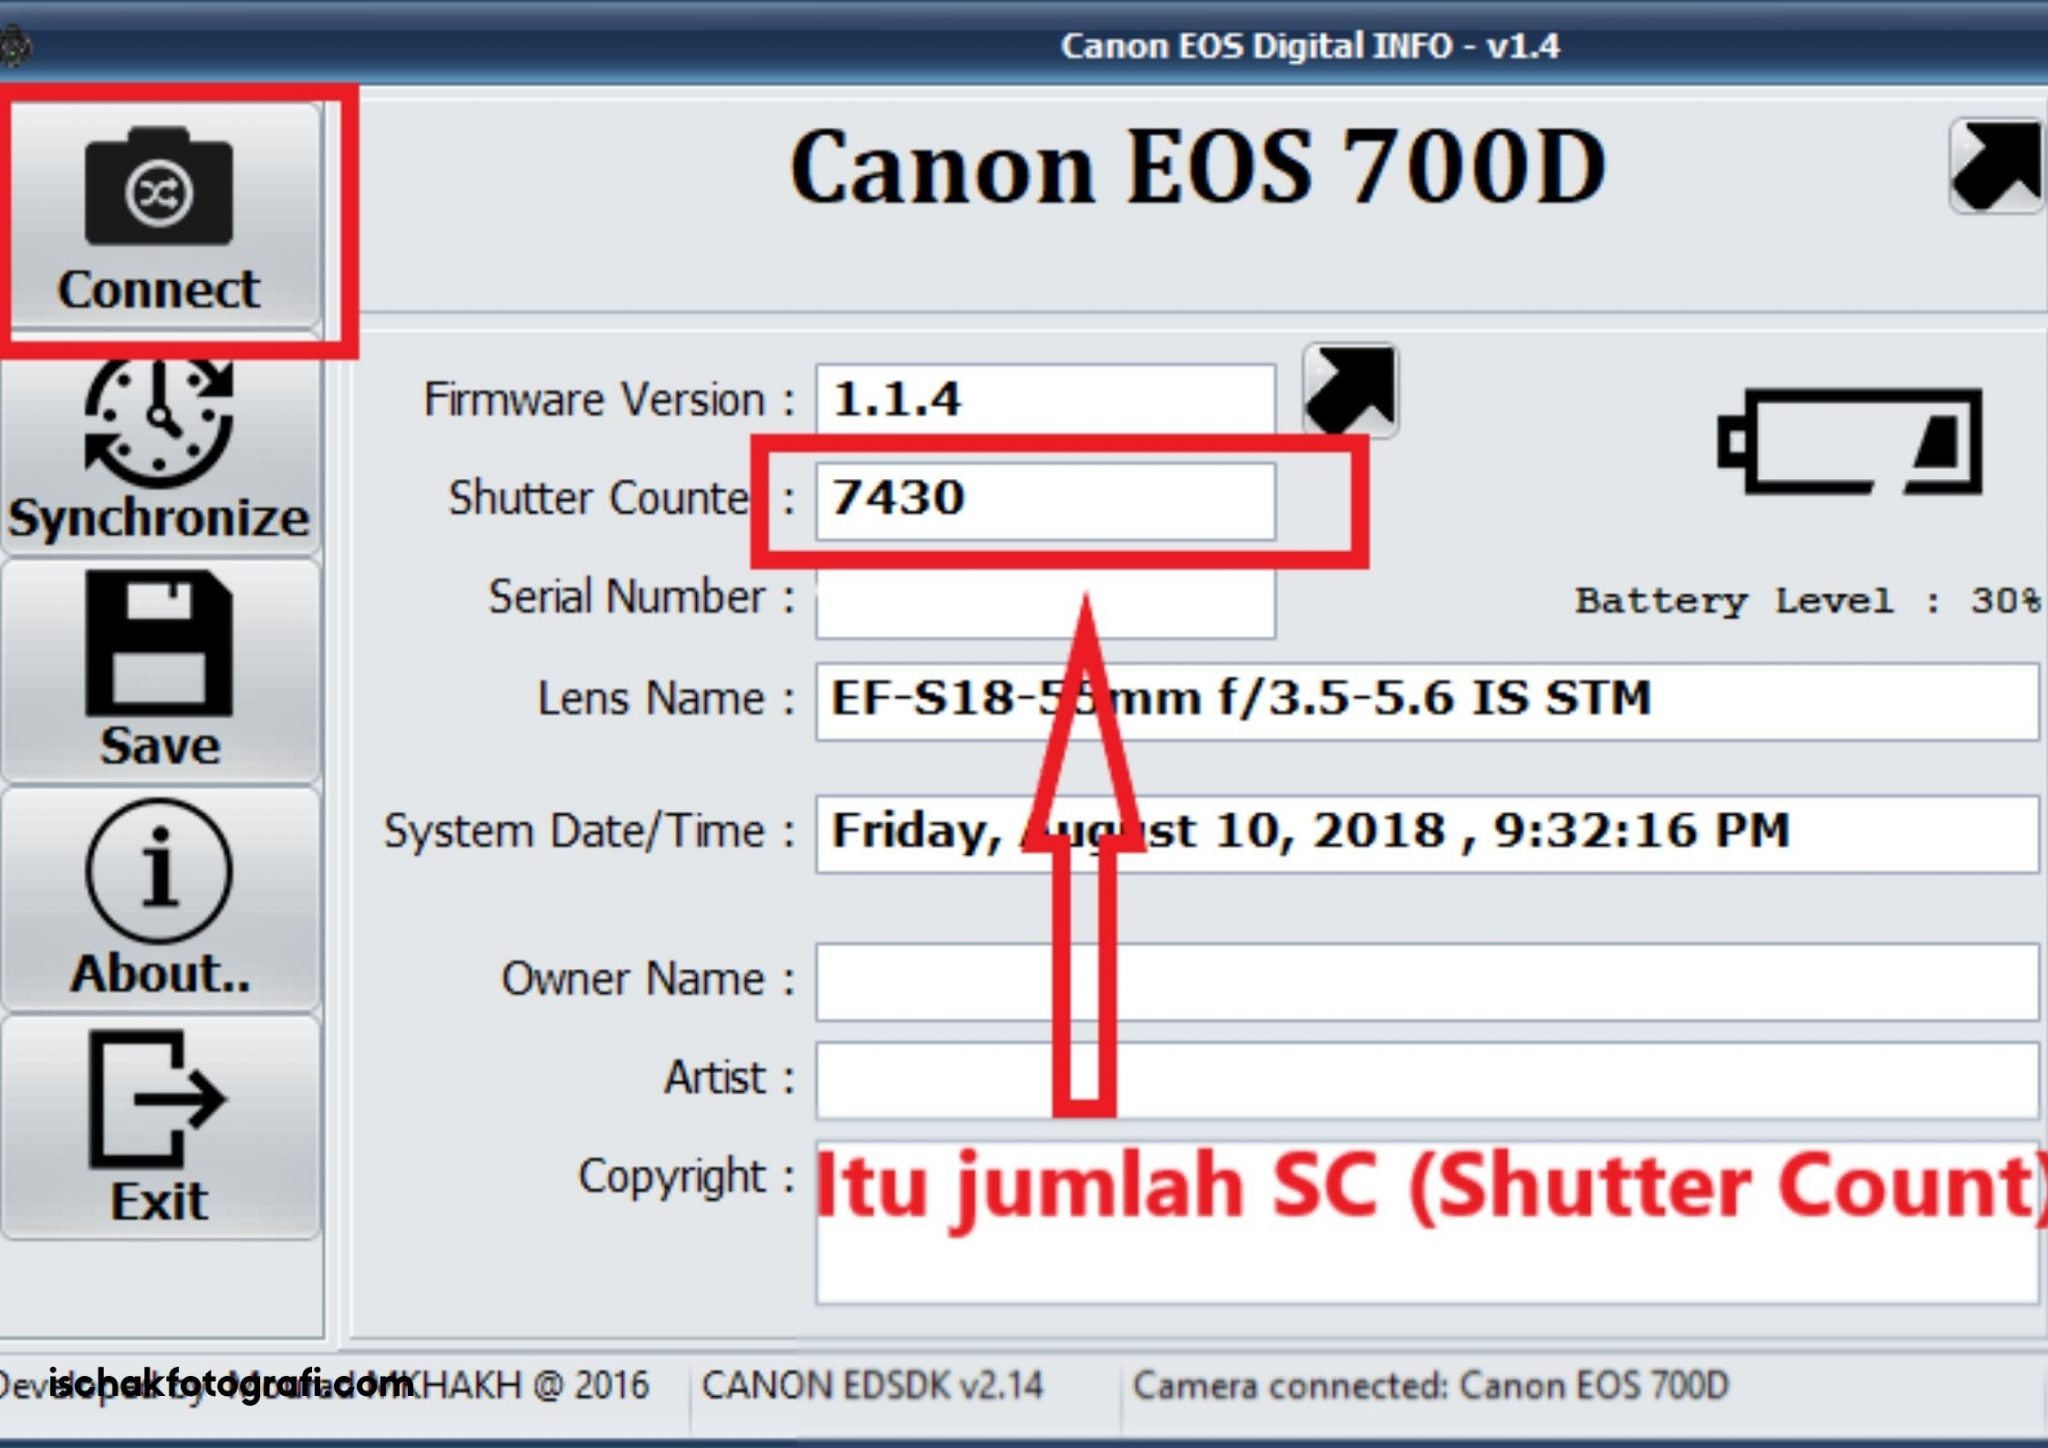 online shutter count for canon